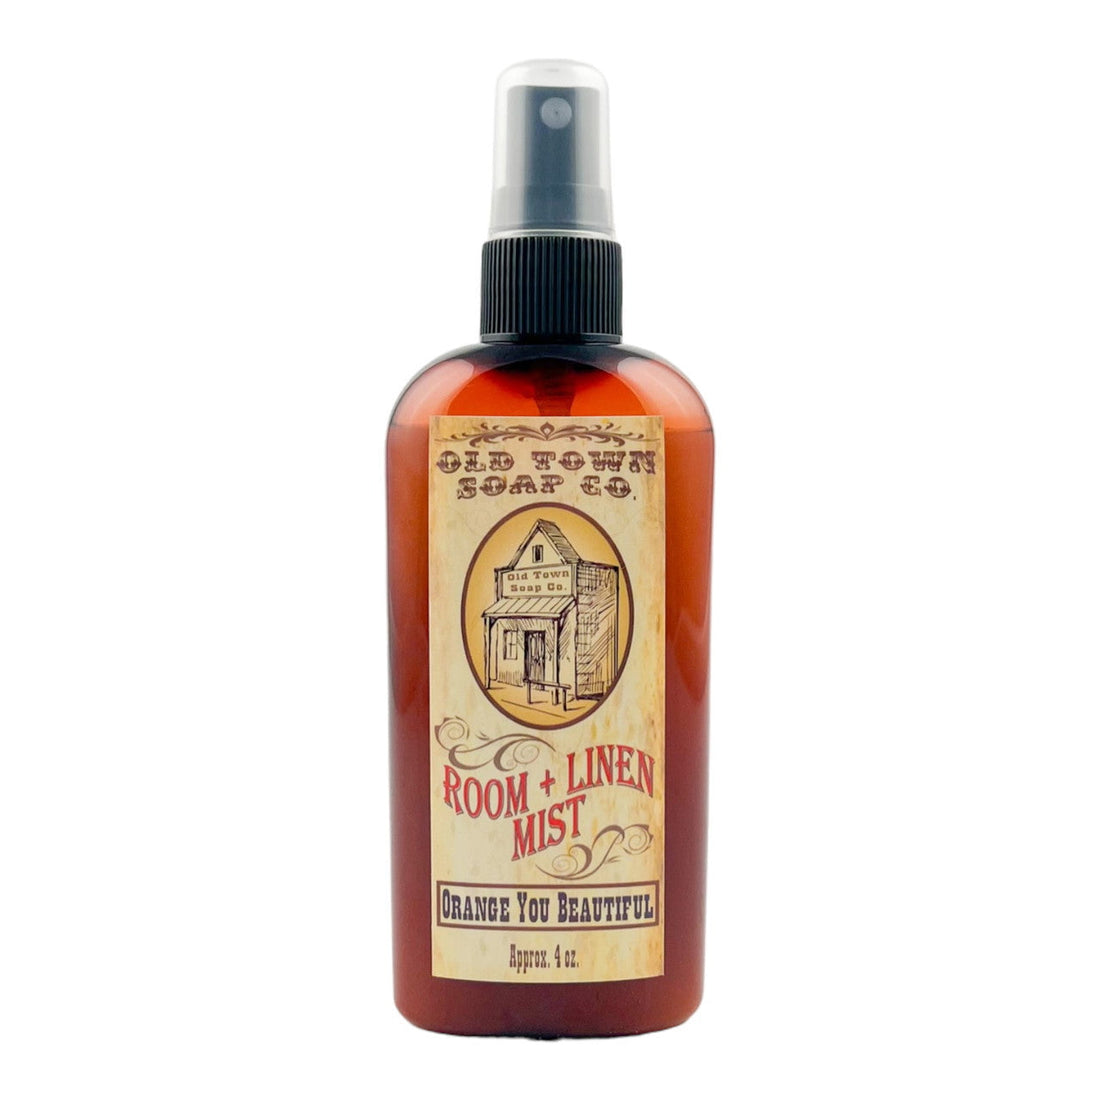 Orange You Beautiful -Room+Linen Mist - Old Town Soap Co.